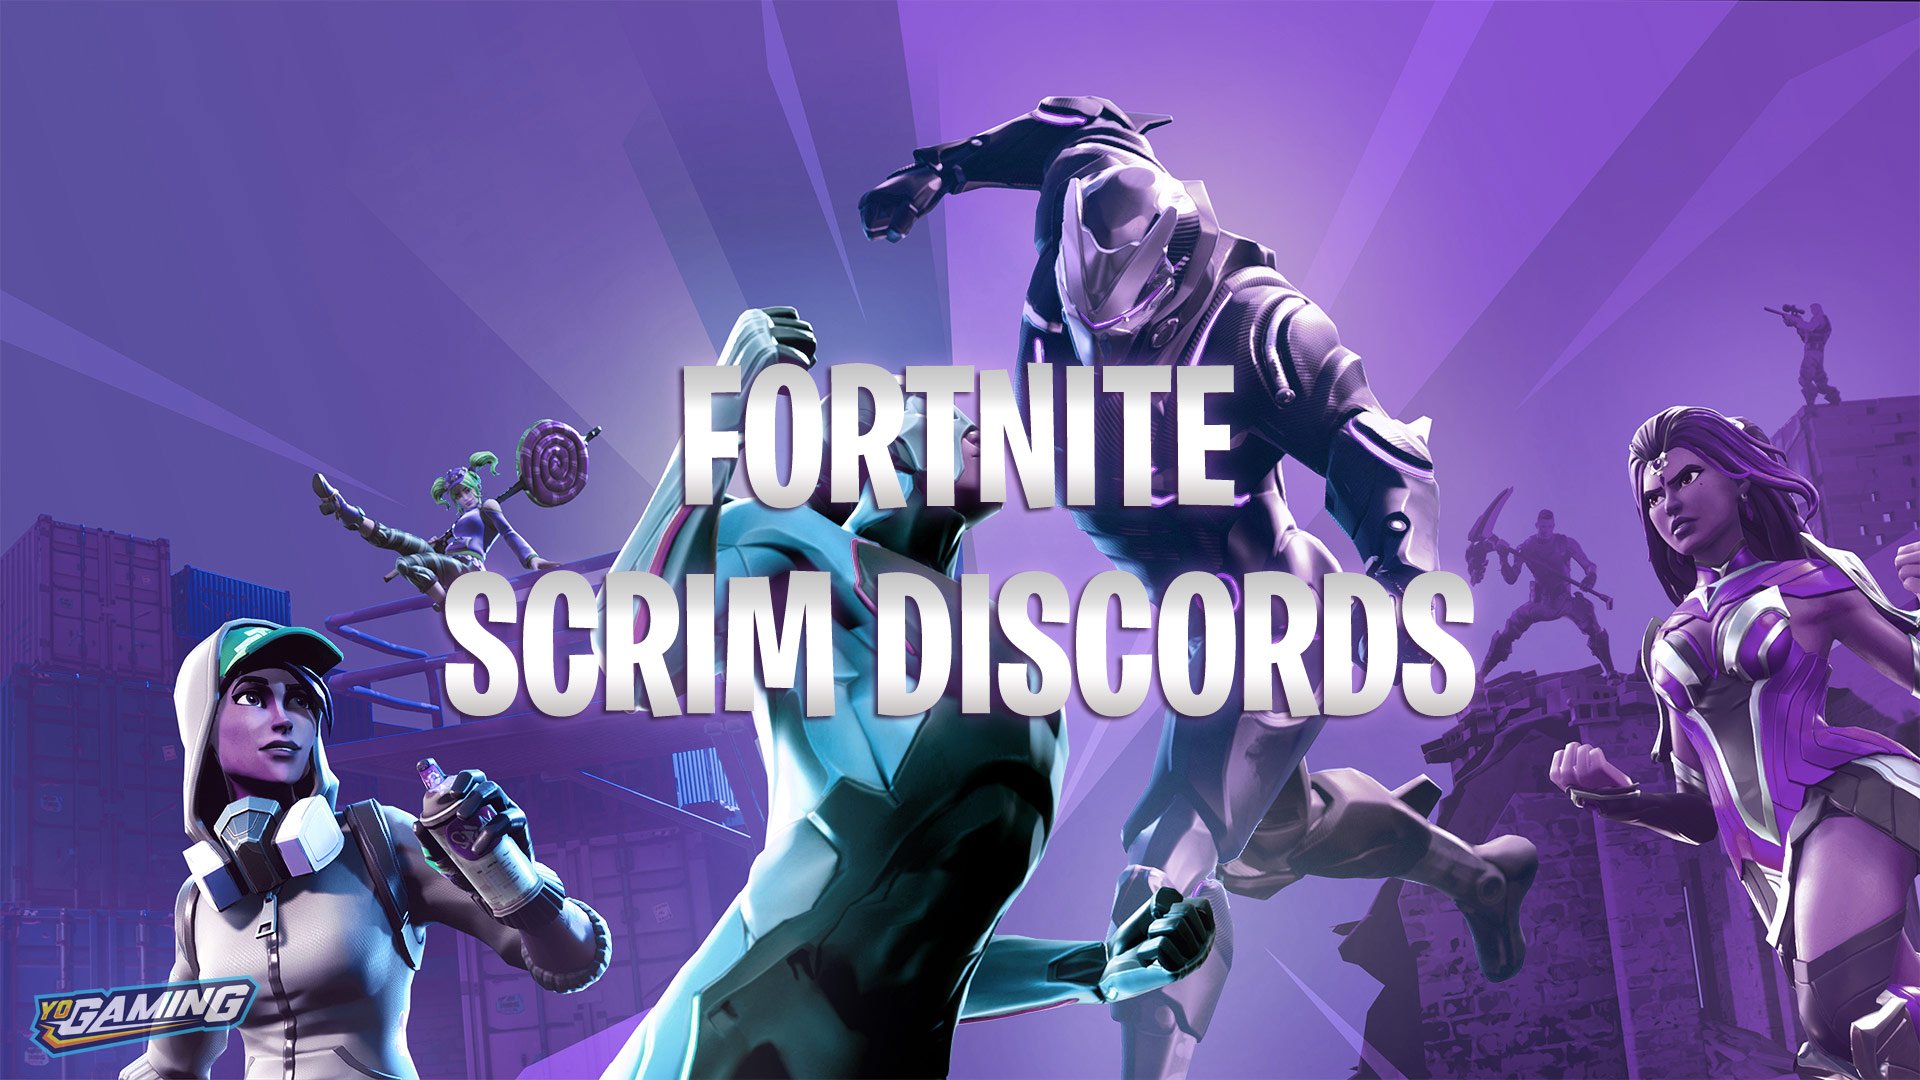 Fortnite Discords with Pro Scrims & Snipes (Solo/Duo/Squad) - Updated  December 2023